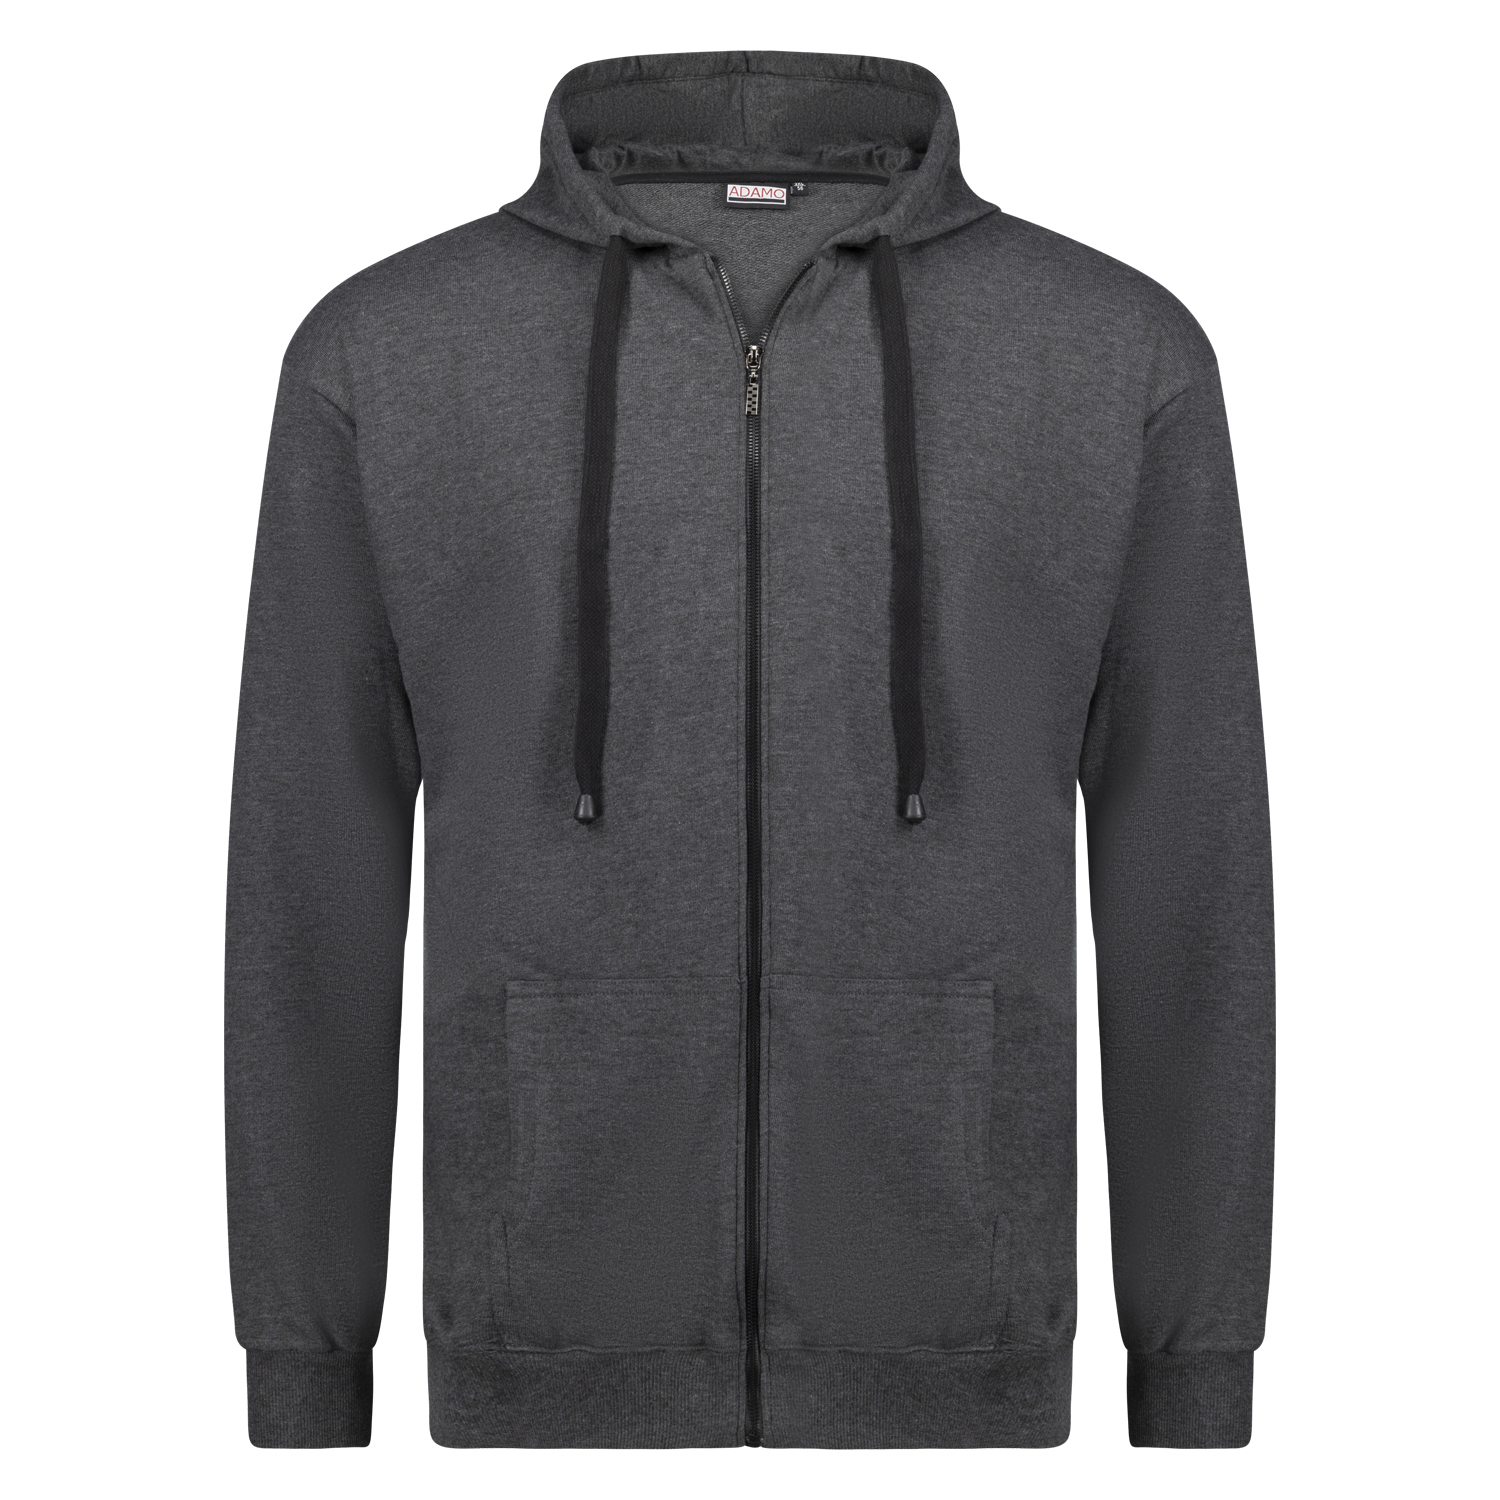 Hooded sweat jacket ATHEN from Adamo anthracite mottled in oversizes up to 14XL